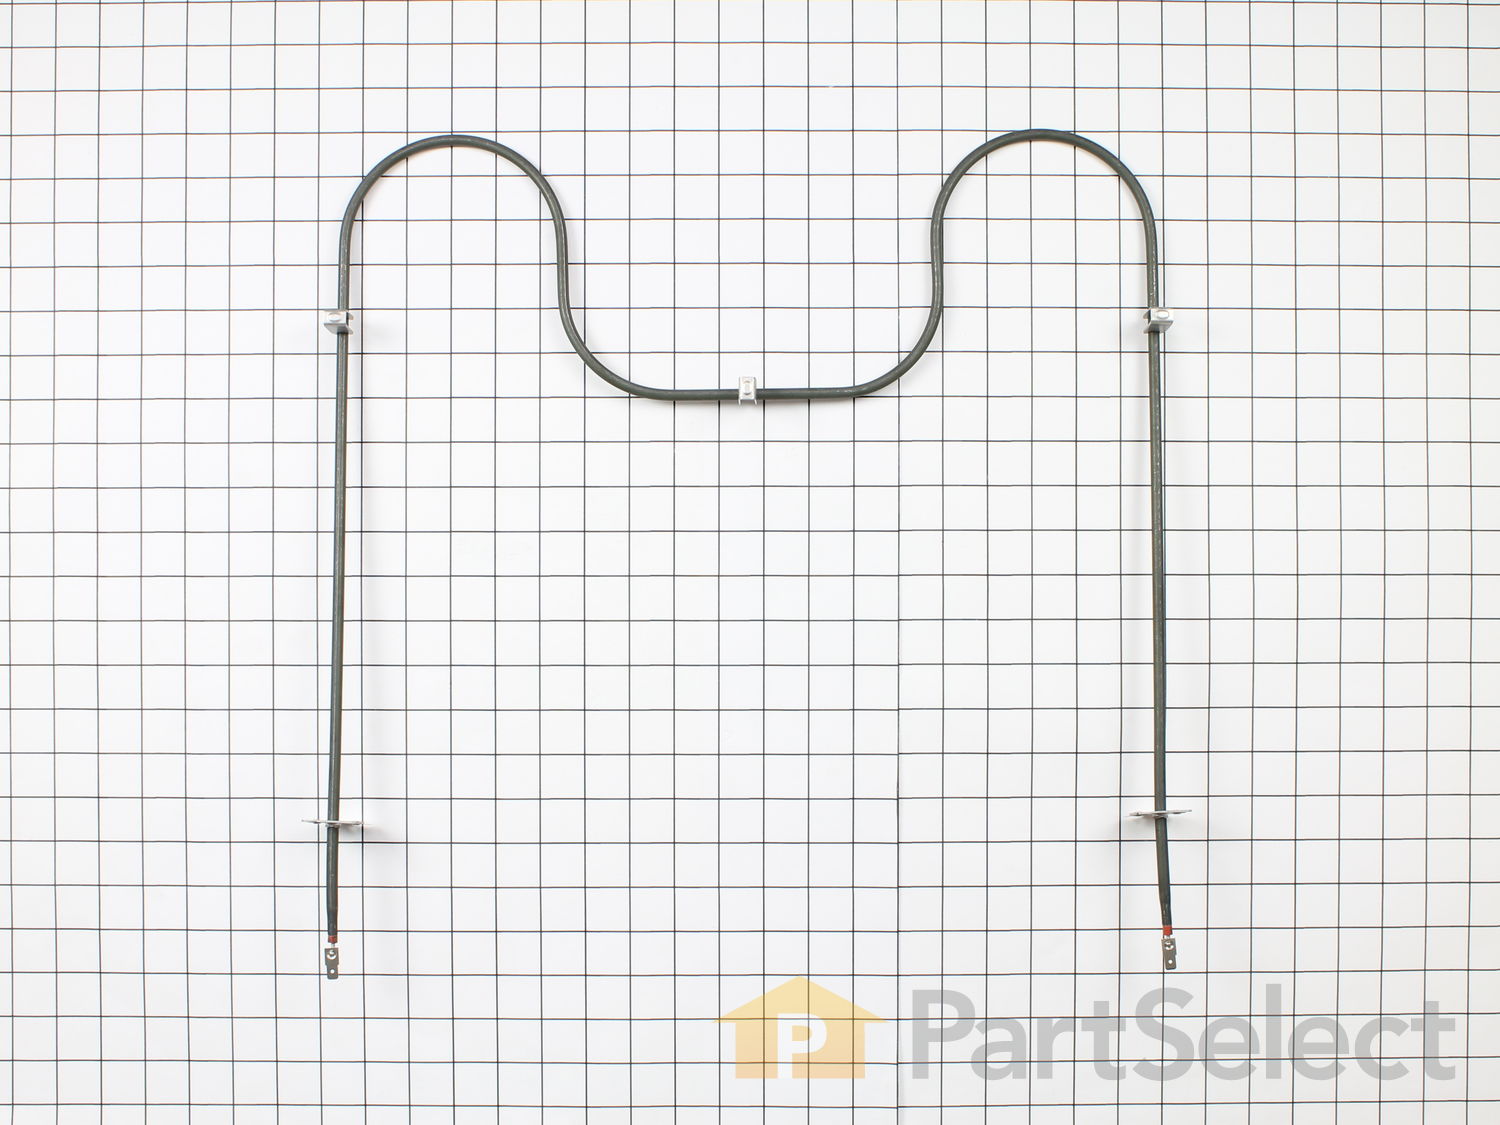 74010750 WP74010750 AP6011209 74003039 7406P425-60 PS11744404 Oven Bake Element 